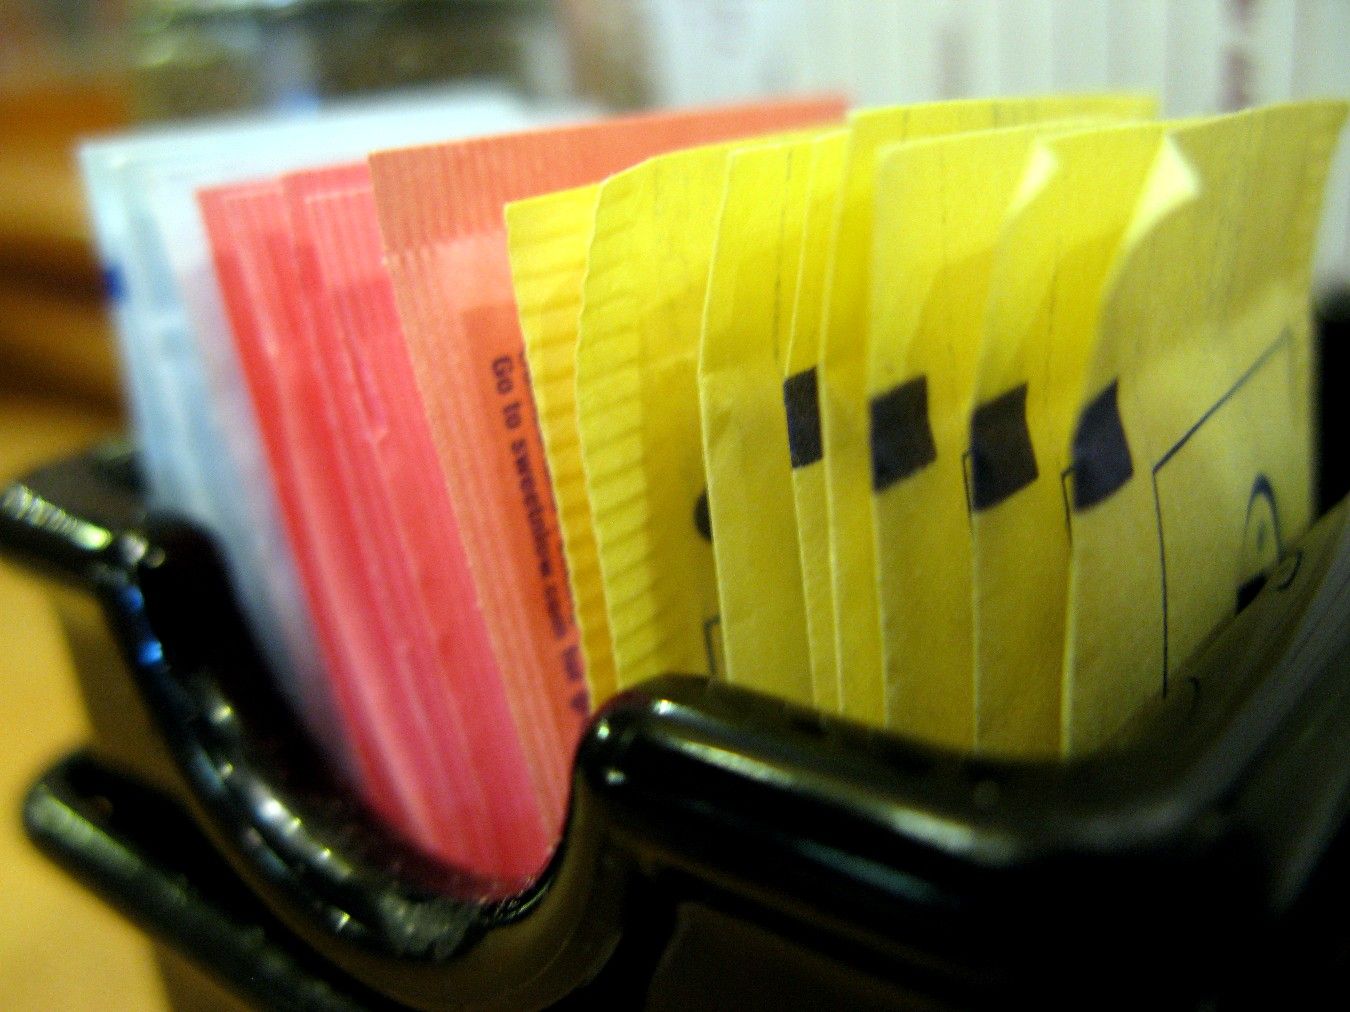 Cutting Down On Sugar To Lose Weight? Avoid Artificial Sweeteners Too, WHO Says